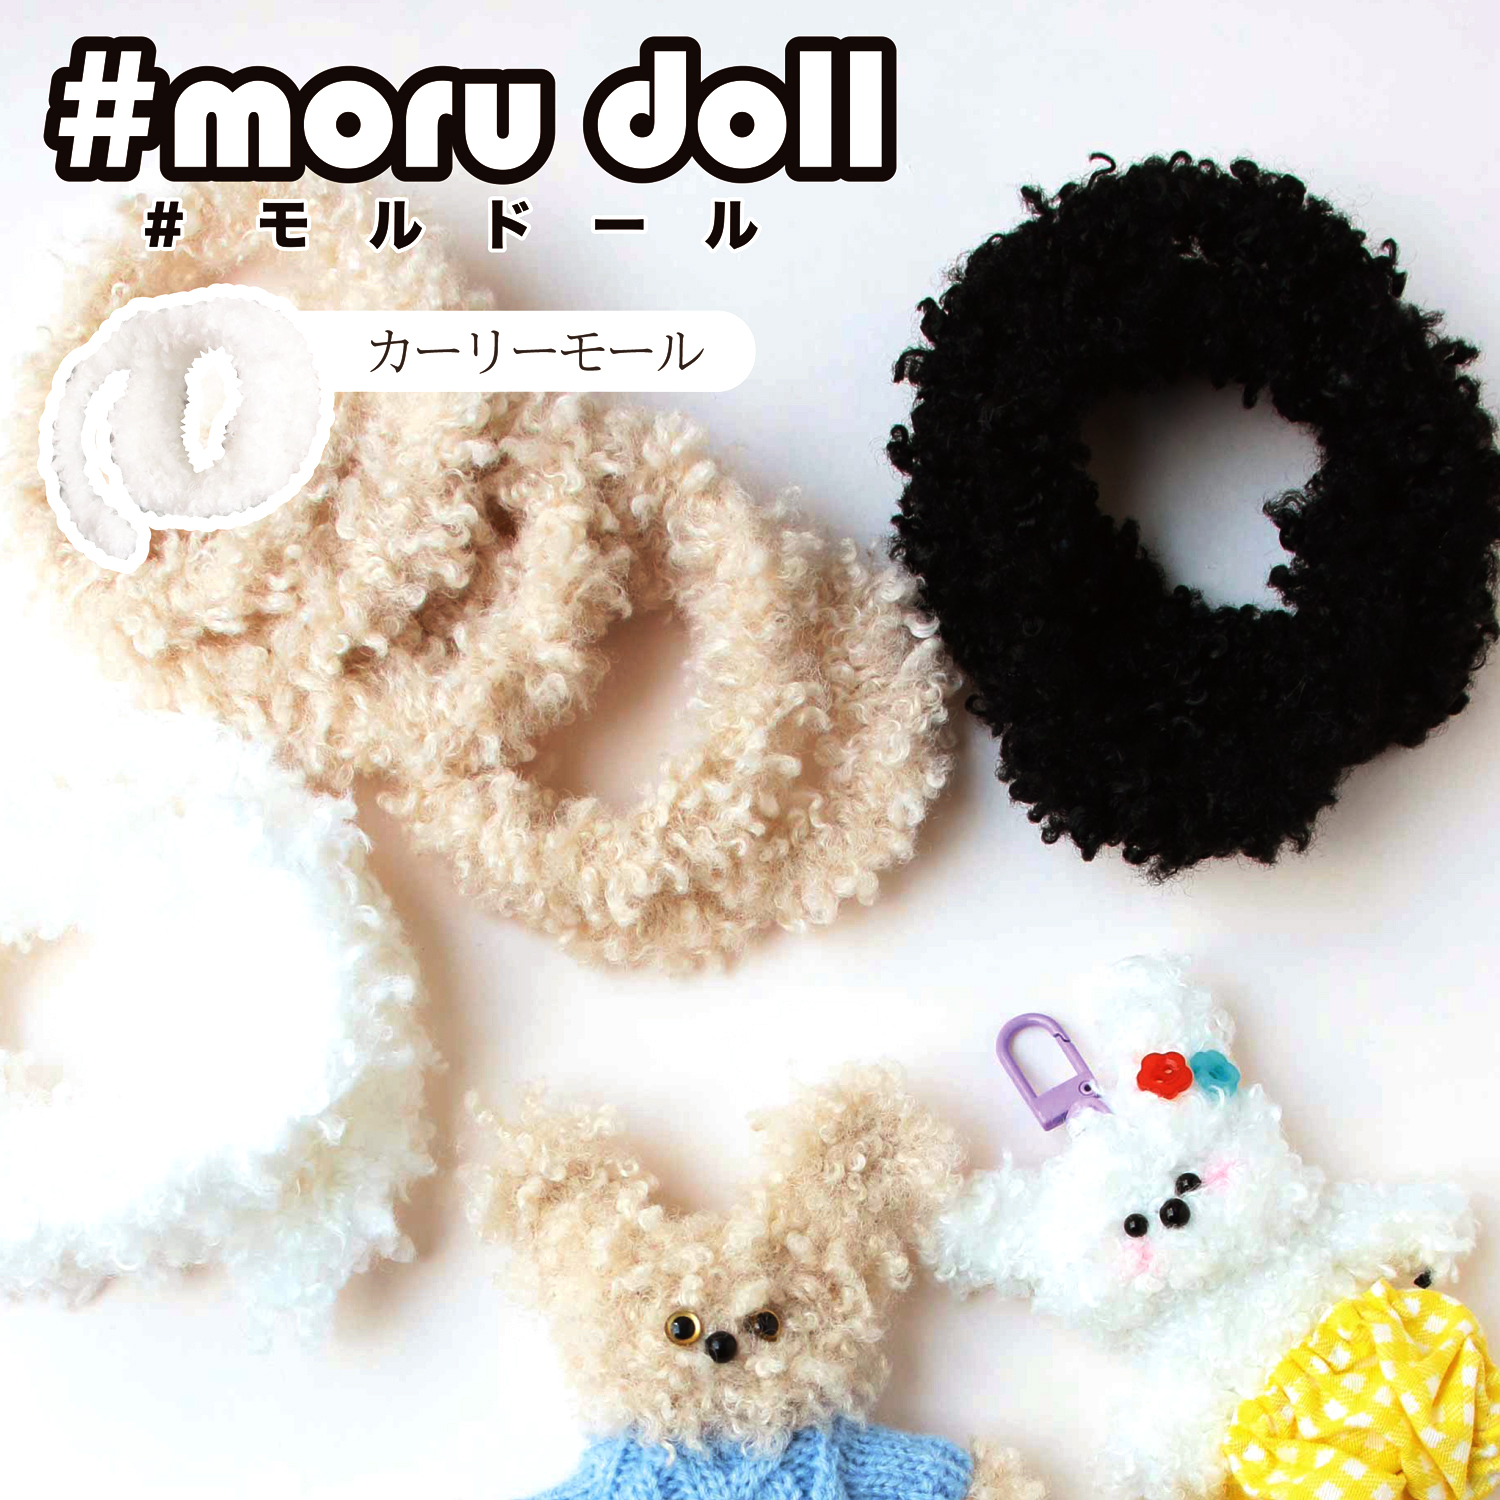 MOL mall doll Korean miscellaneous goods curly mall (bag)